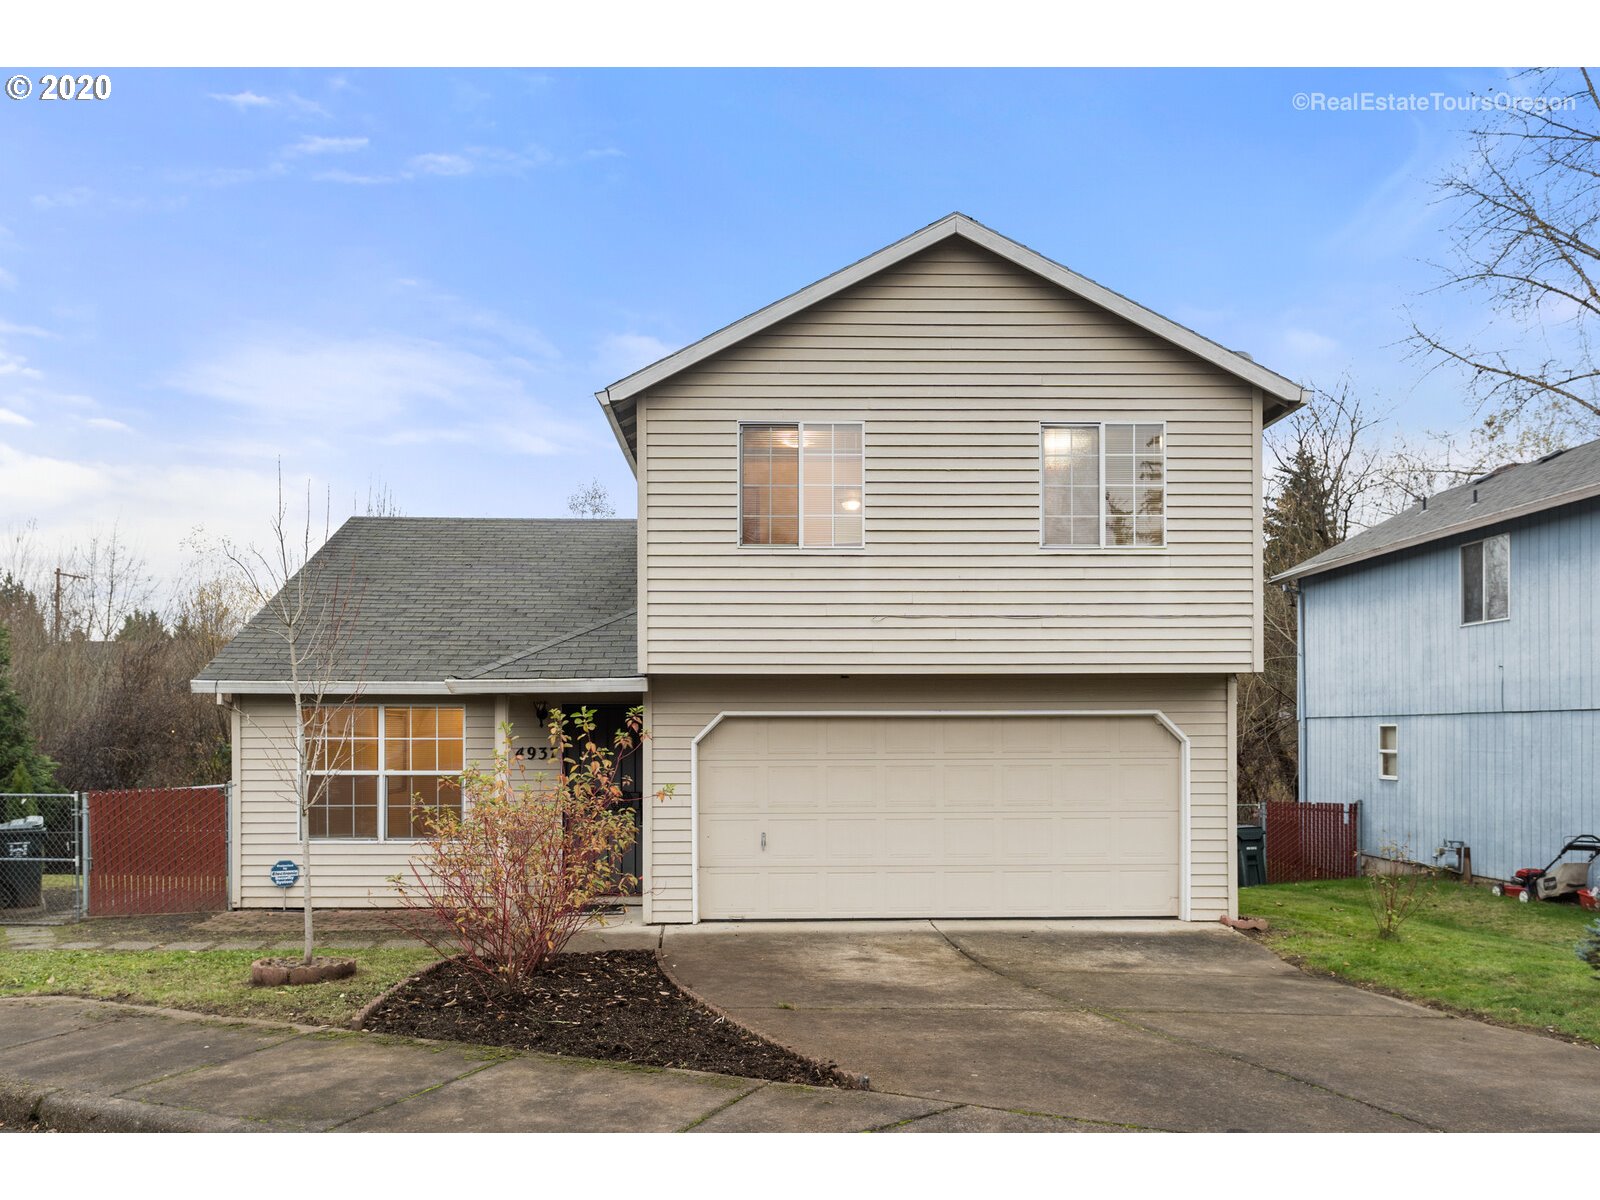 4937 SW 208TH TER (1 of 32)